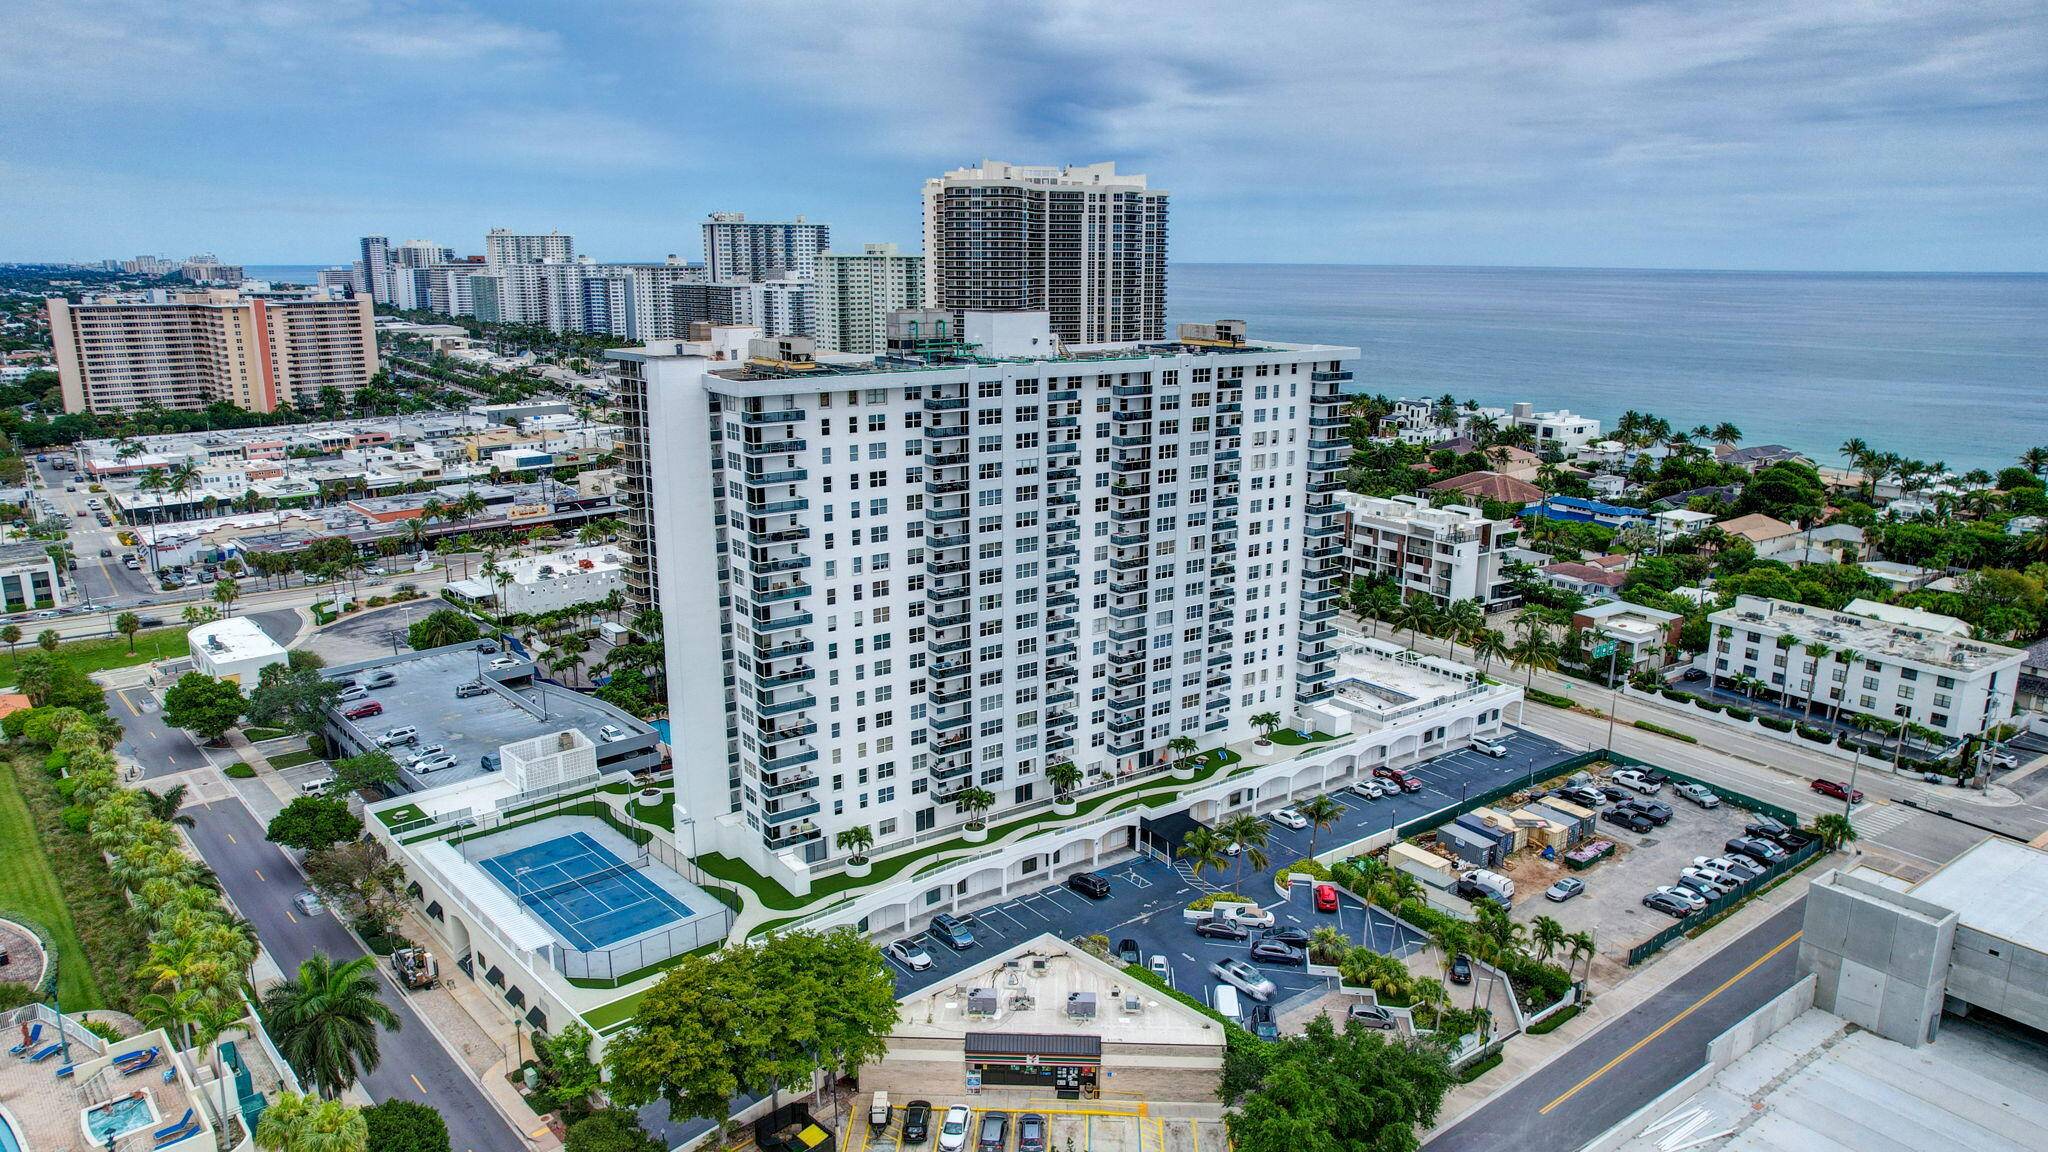 2 2 condo located directly across the street from the beach in Fort Lauderdale.